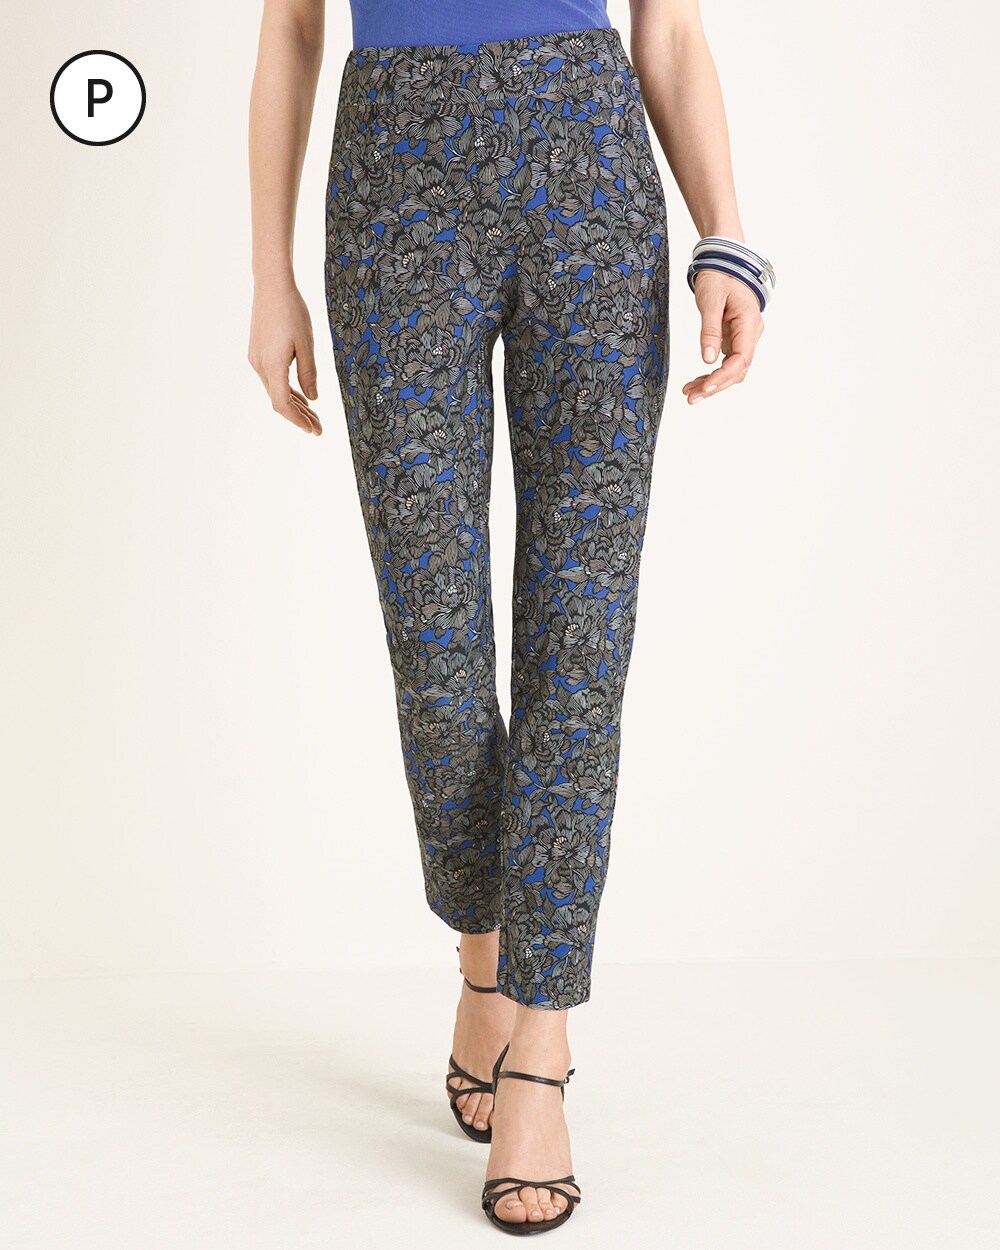 Travelers Collection Petite Printed Crepe Ankle Pants